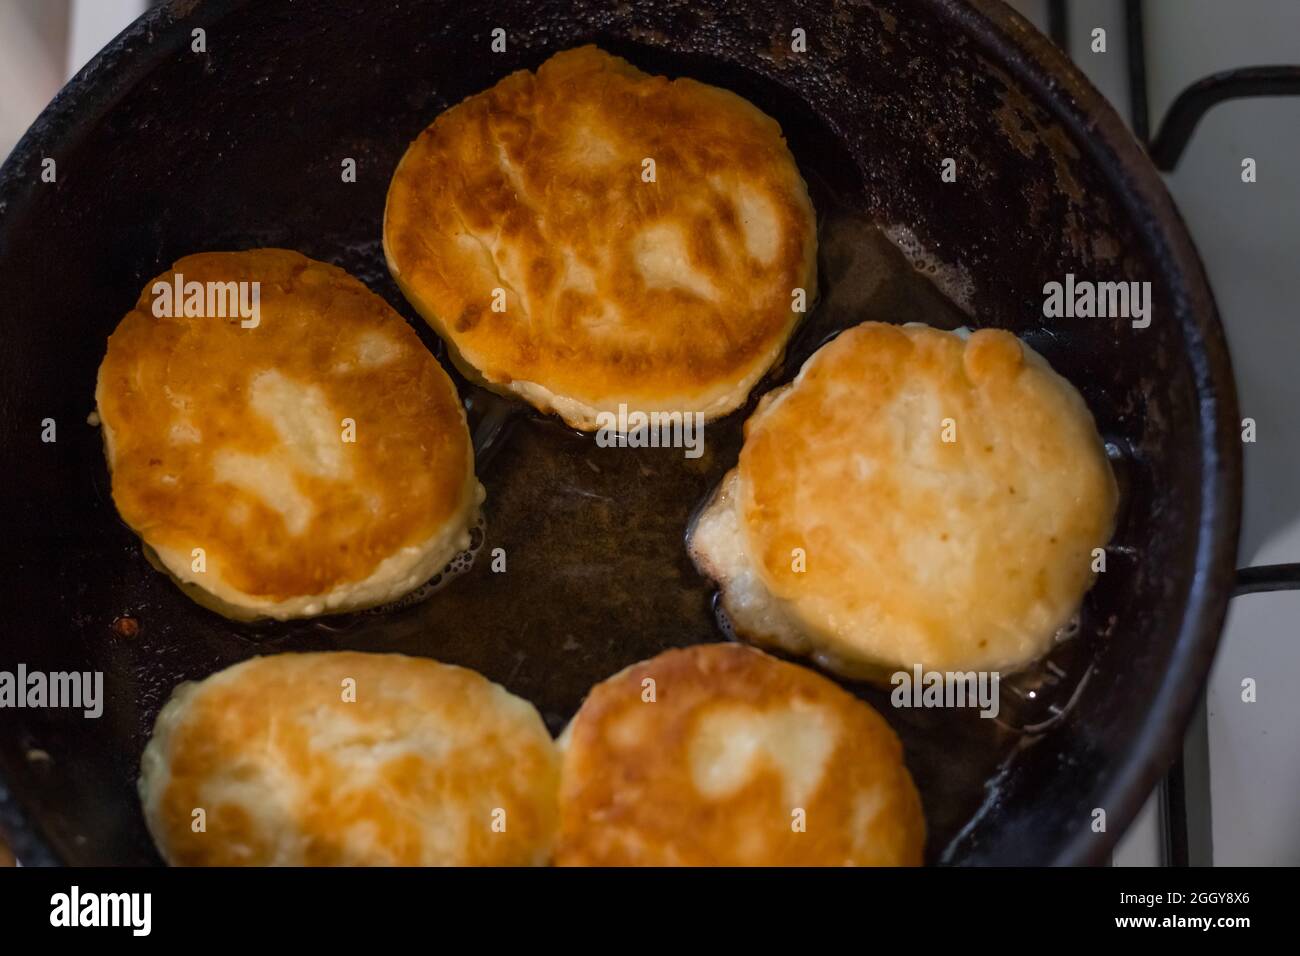 Freshly fried pancakes are prepared for breakfast. Cooking food in the kitchen. Stock Photo